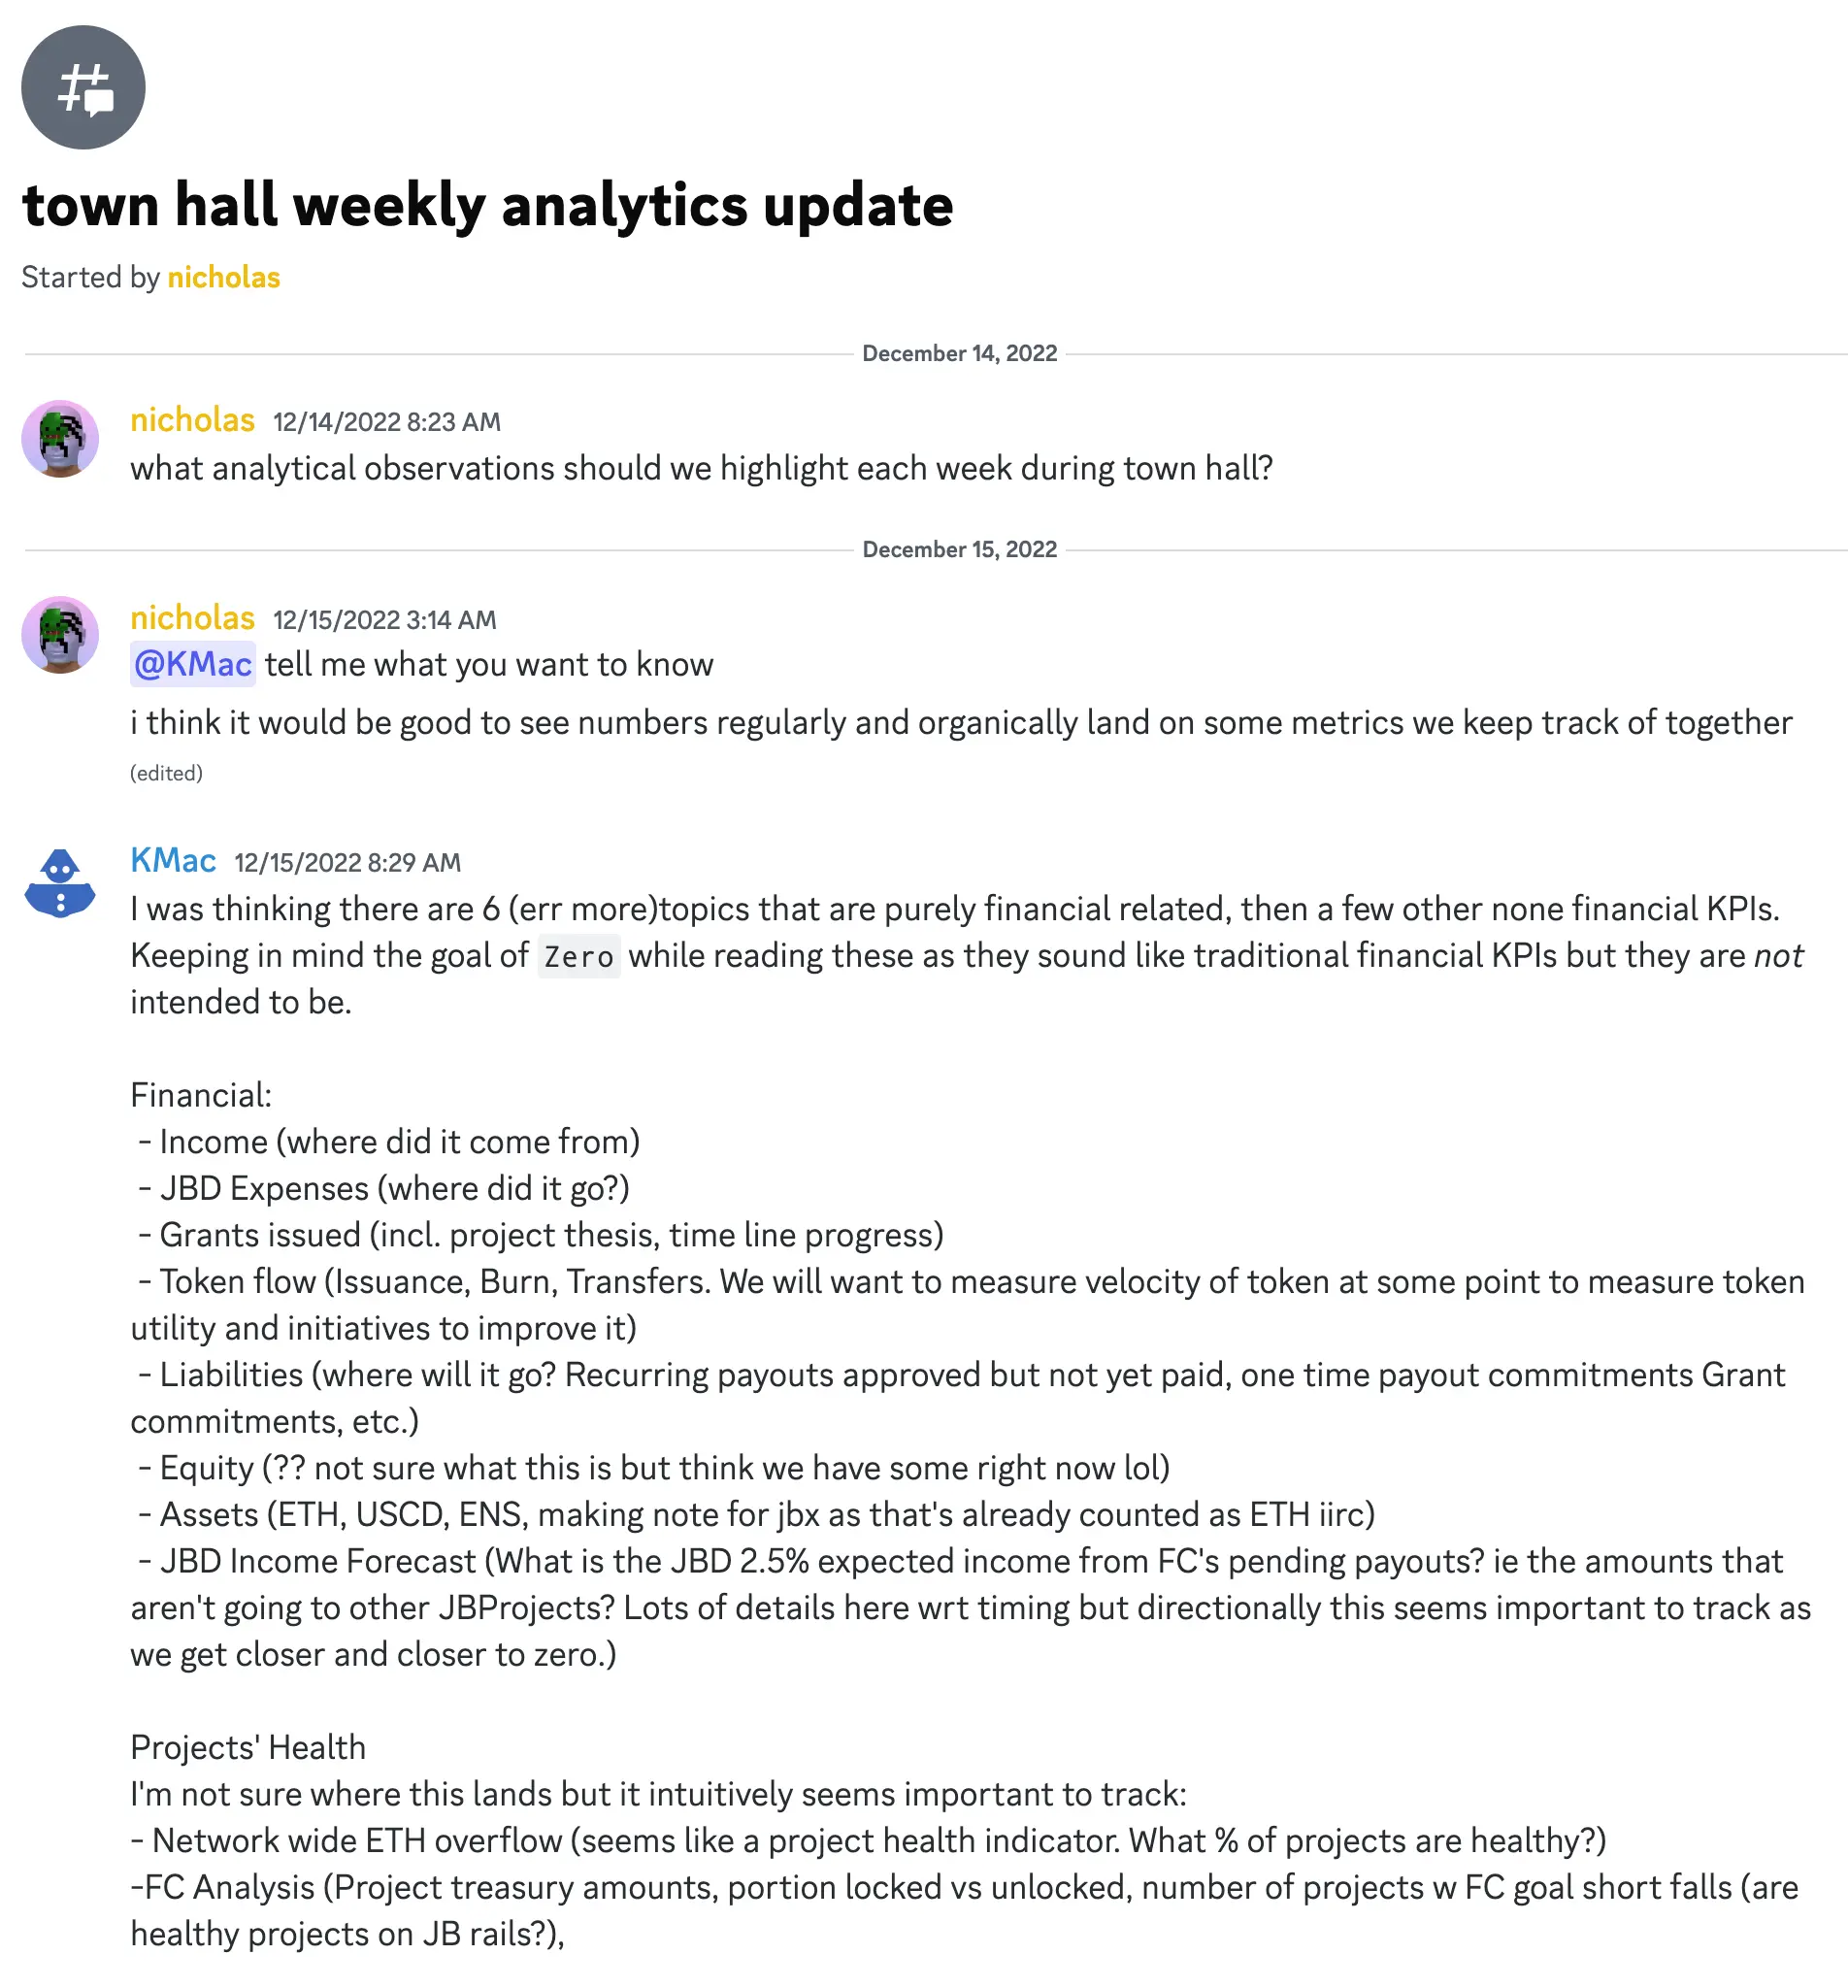 town hall analytic update discussion